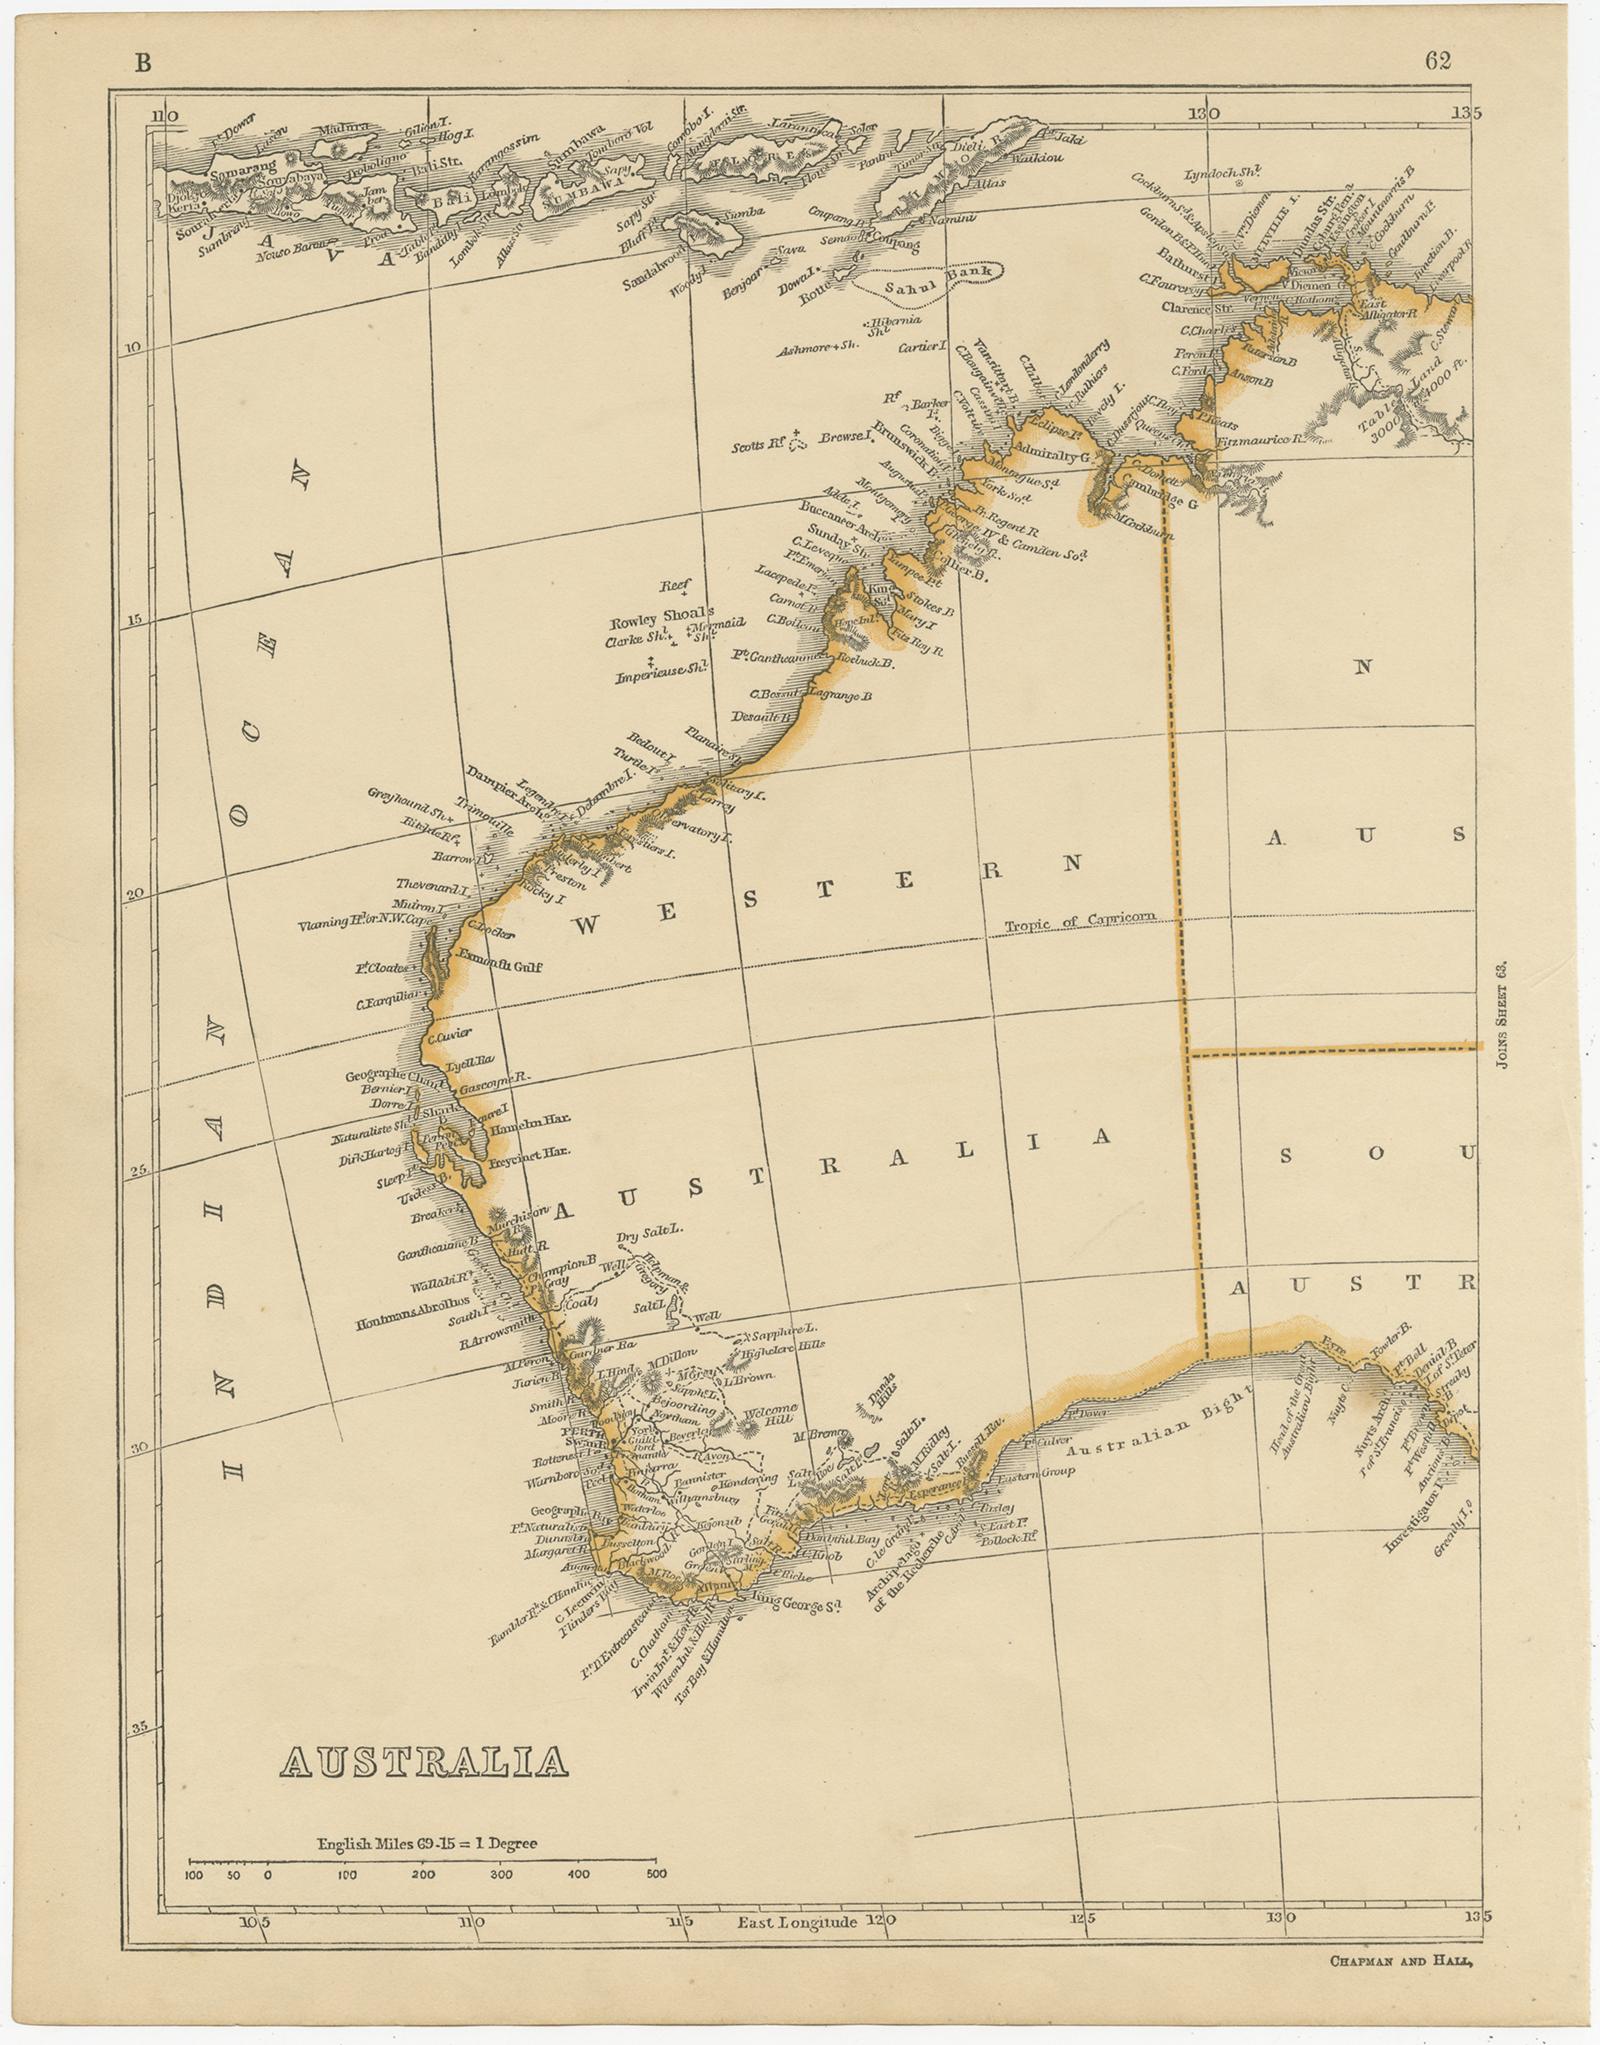 Antique map titled 'Australia'. Two individual sheets of Australia. This map originates from 'Lowry's table Atlas constructed and engraved from the most recent authorities' by J.W. Lowry. Published 1852.